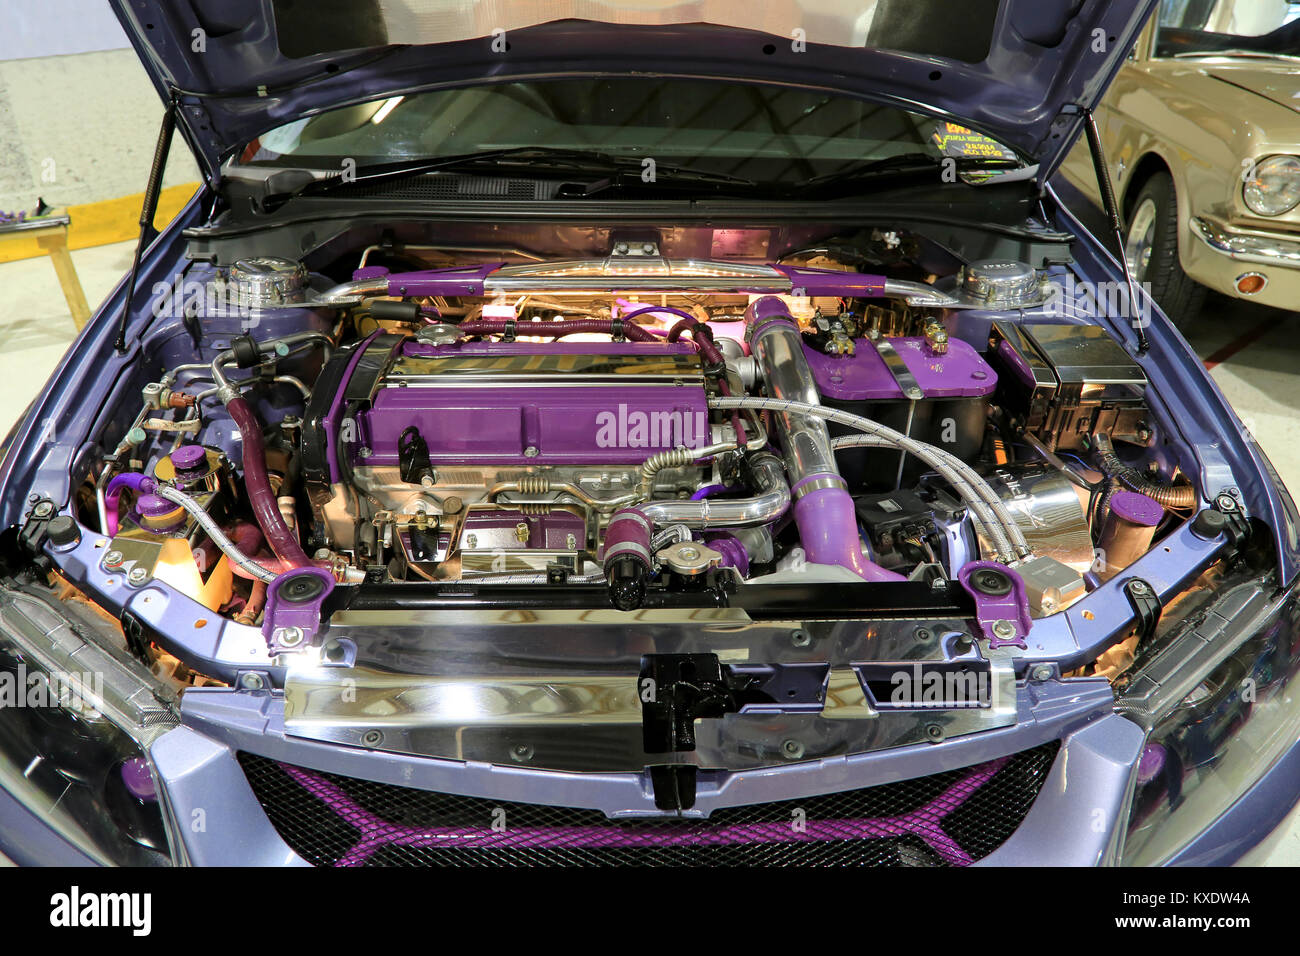 LOIMAA, FINLAND - JUNE 15, 2014:  Show car with open hood and tuned engine compartment at HeMa Show 2014 in Loimaa, Finland. Stock Photo